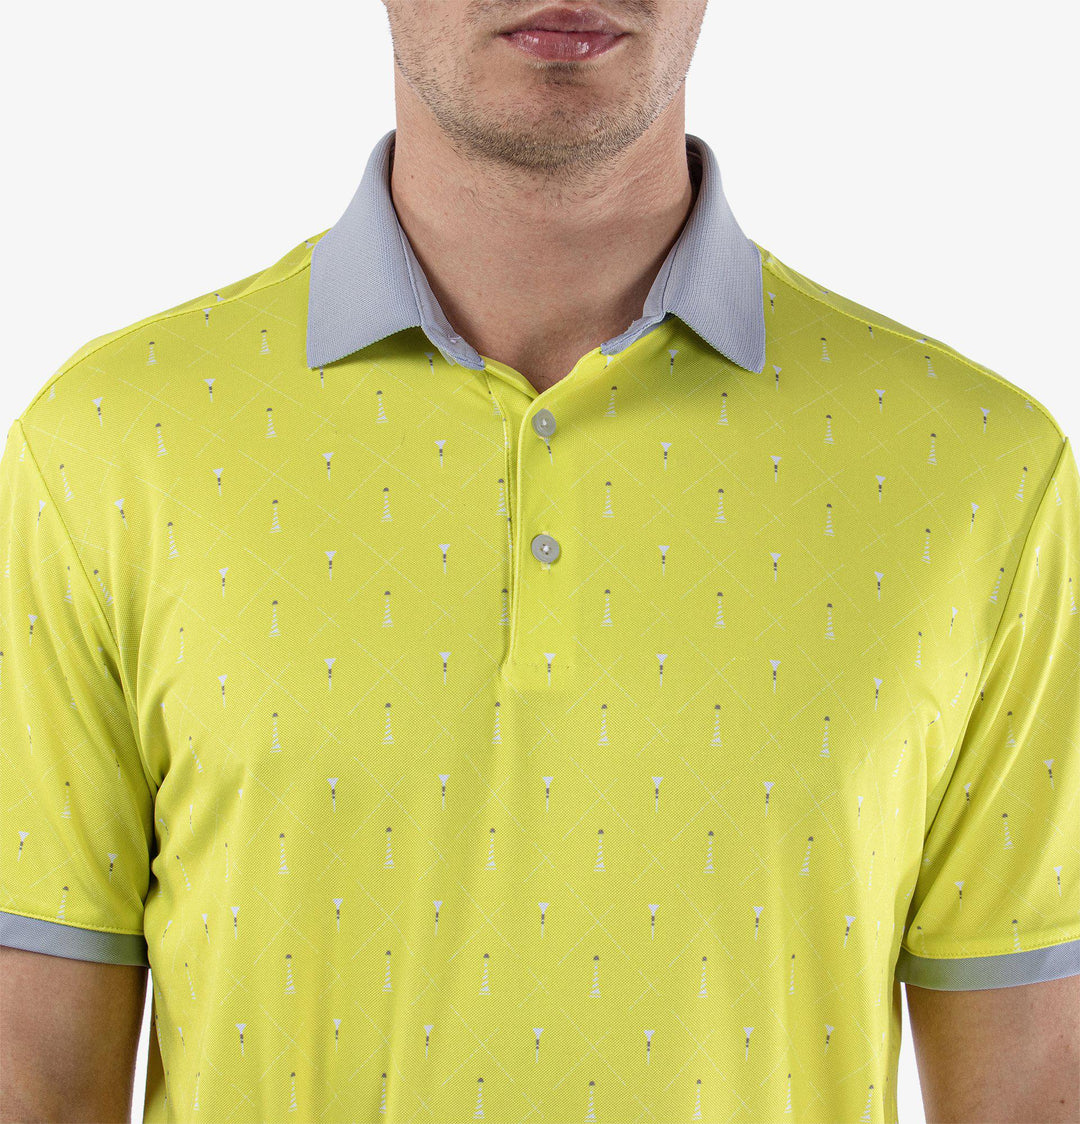 Manolo is a Breathable short sleeve shirt for  in the color Sunny Lime/Cool Grey/White(4)